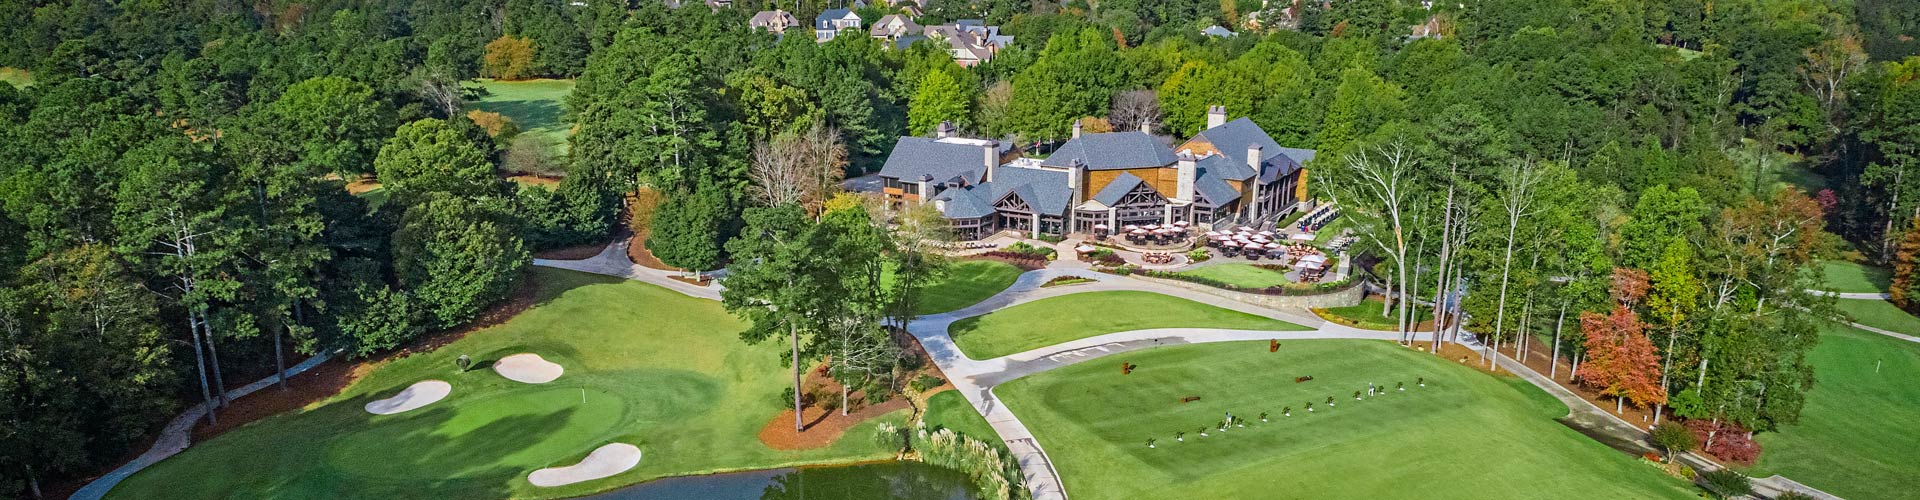 Overhead View of Clubhouse at The Golf Club of Georgia